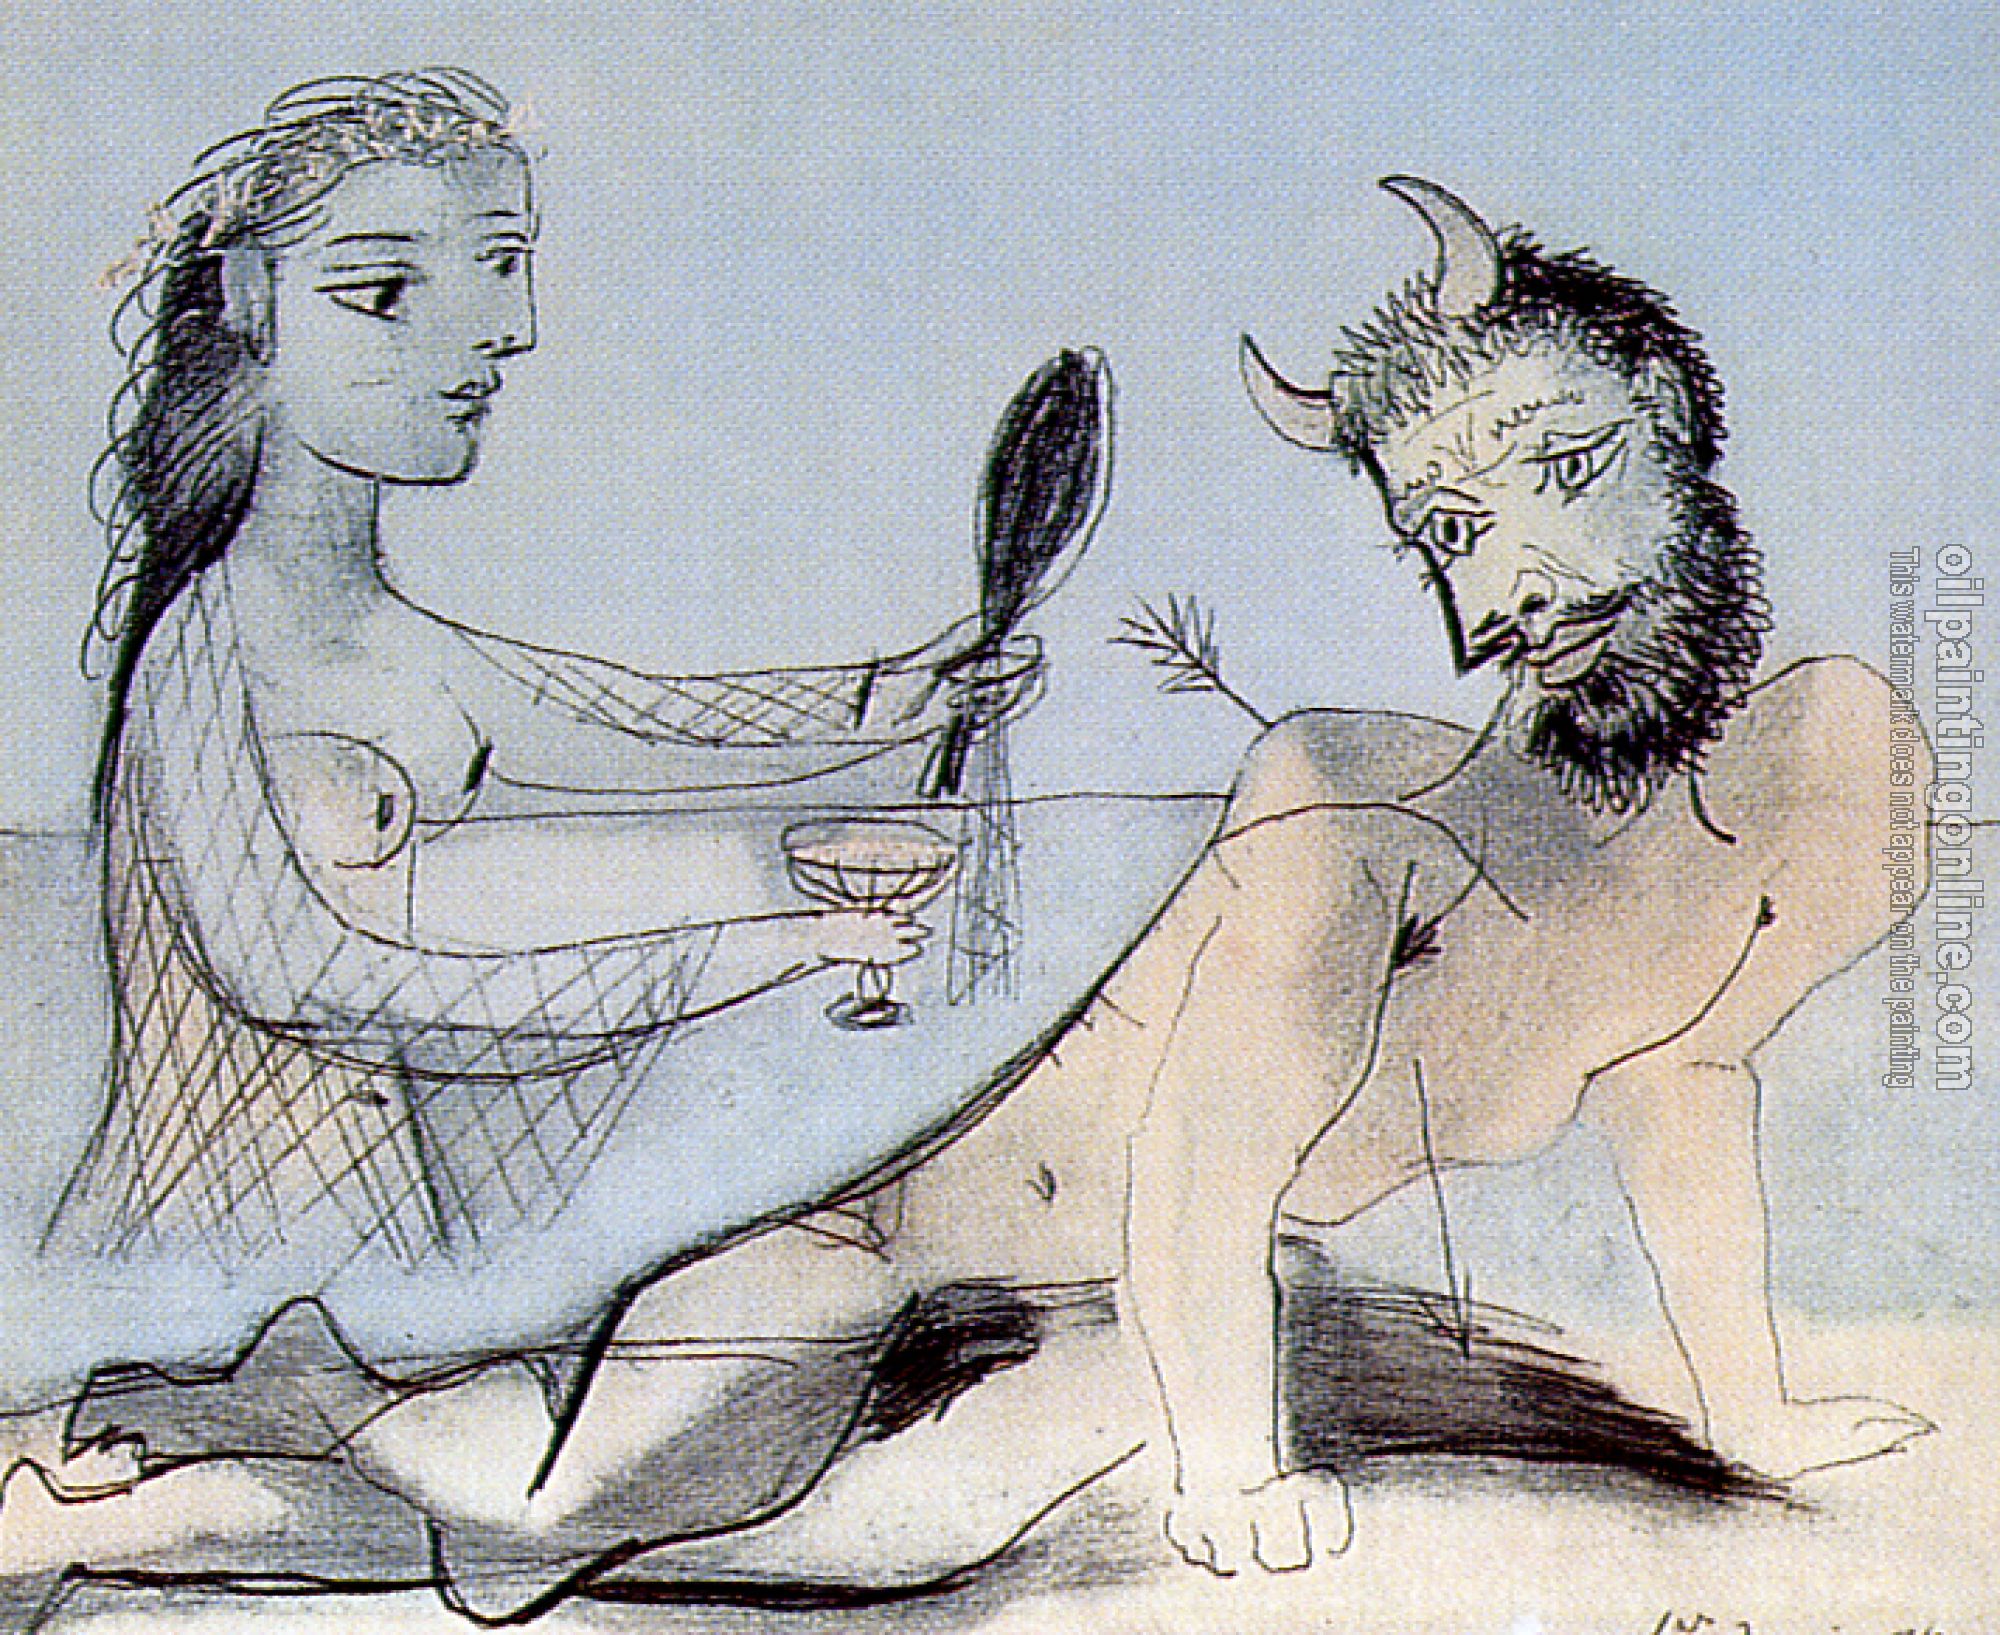 Picasso, Pablo - wounded faun and woman